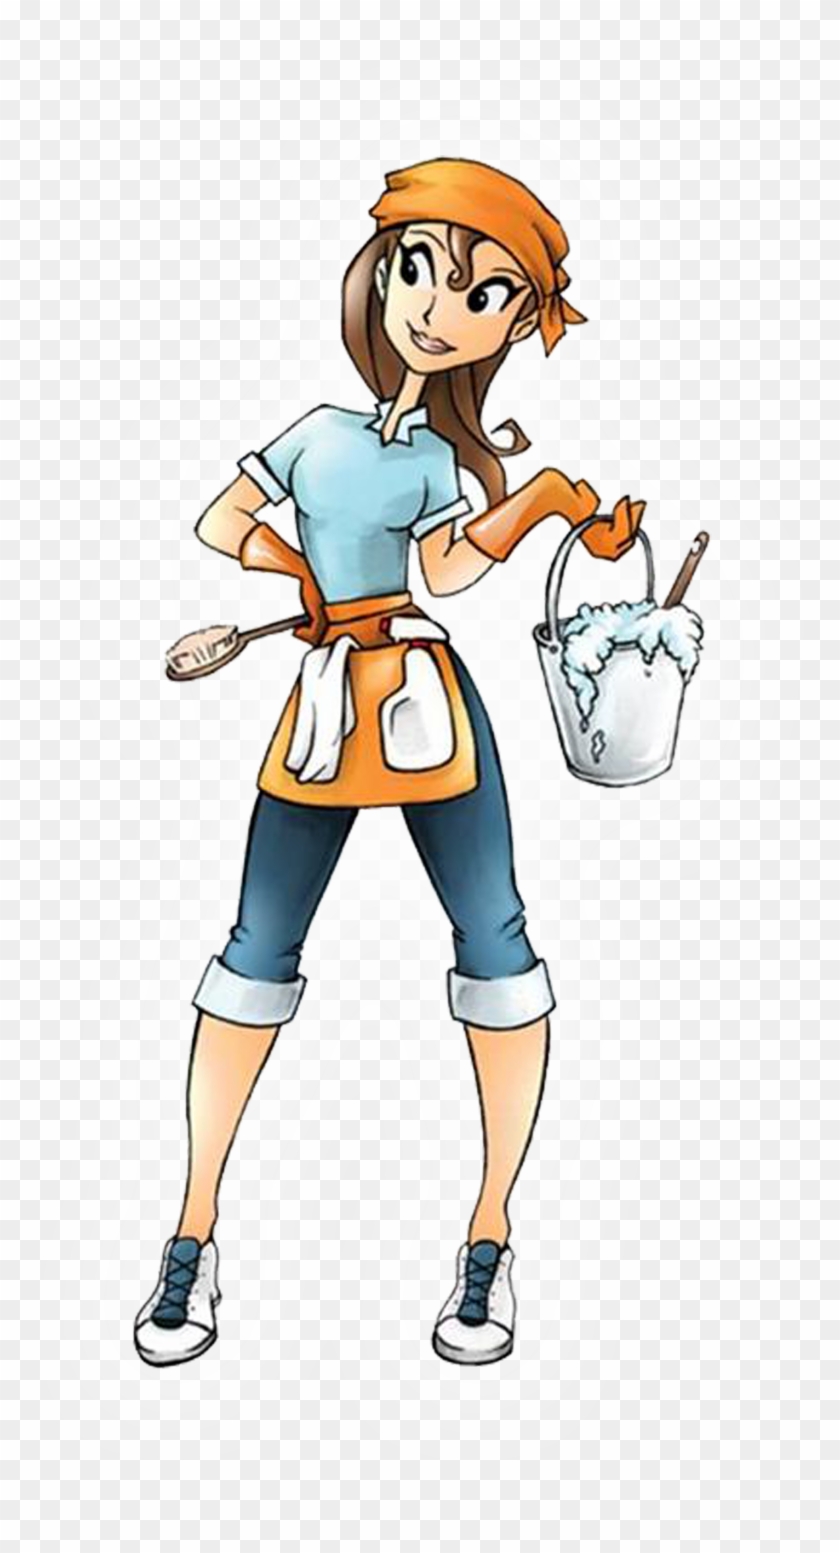 Cleaning Lady Cartoon Cliparts Co - Cleaning Maid #987086